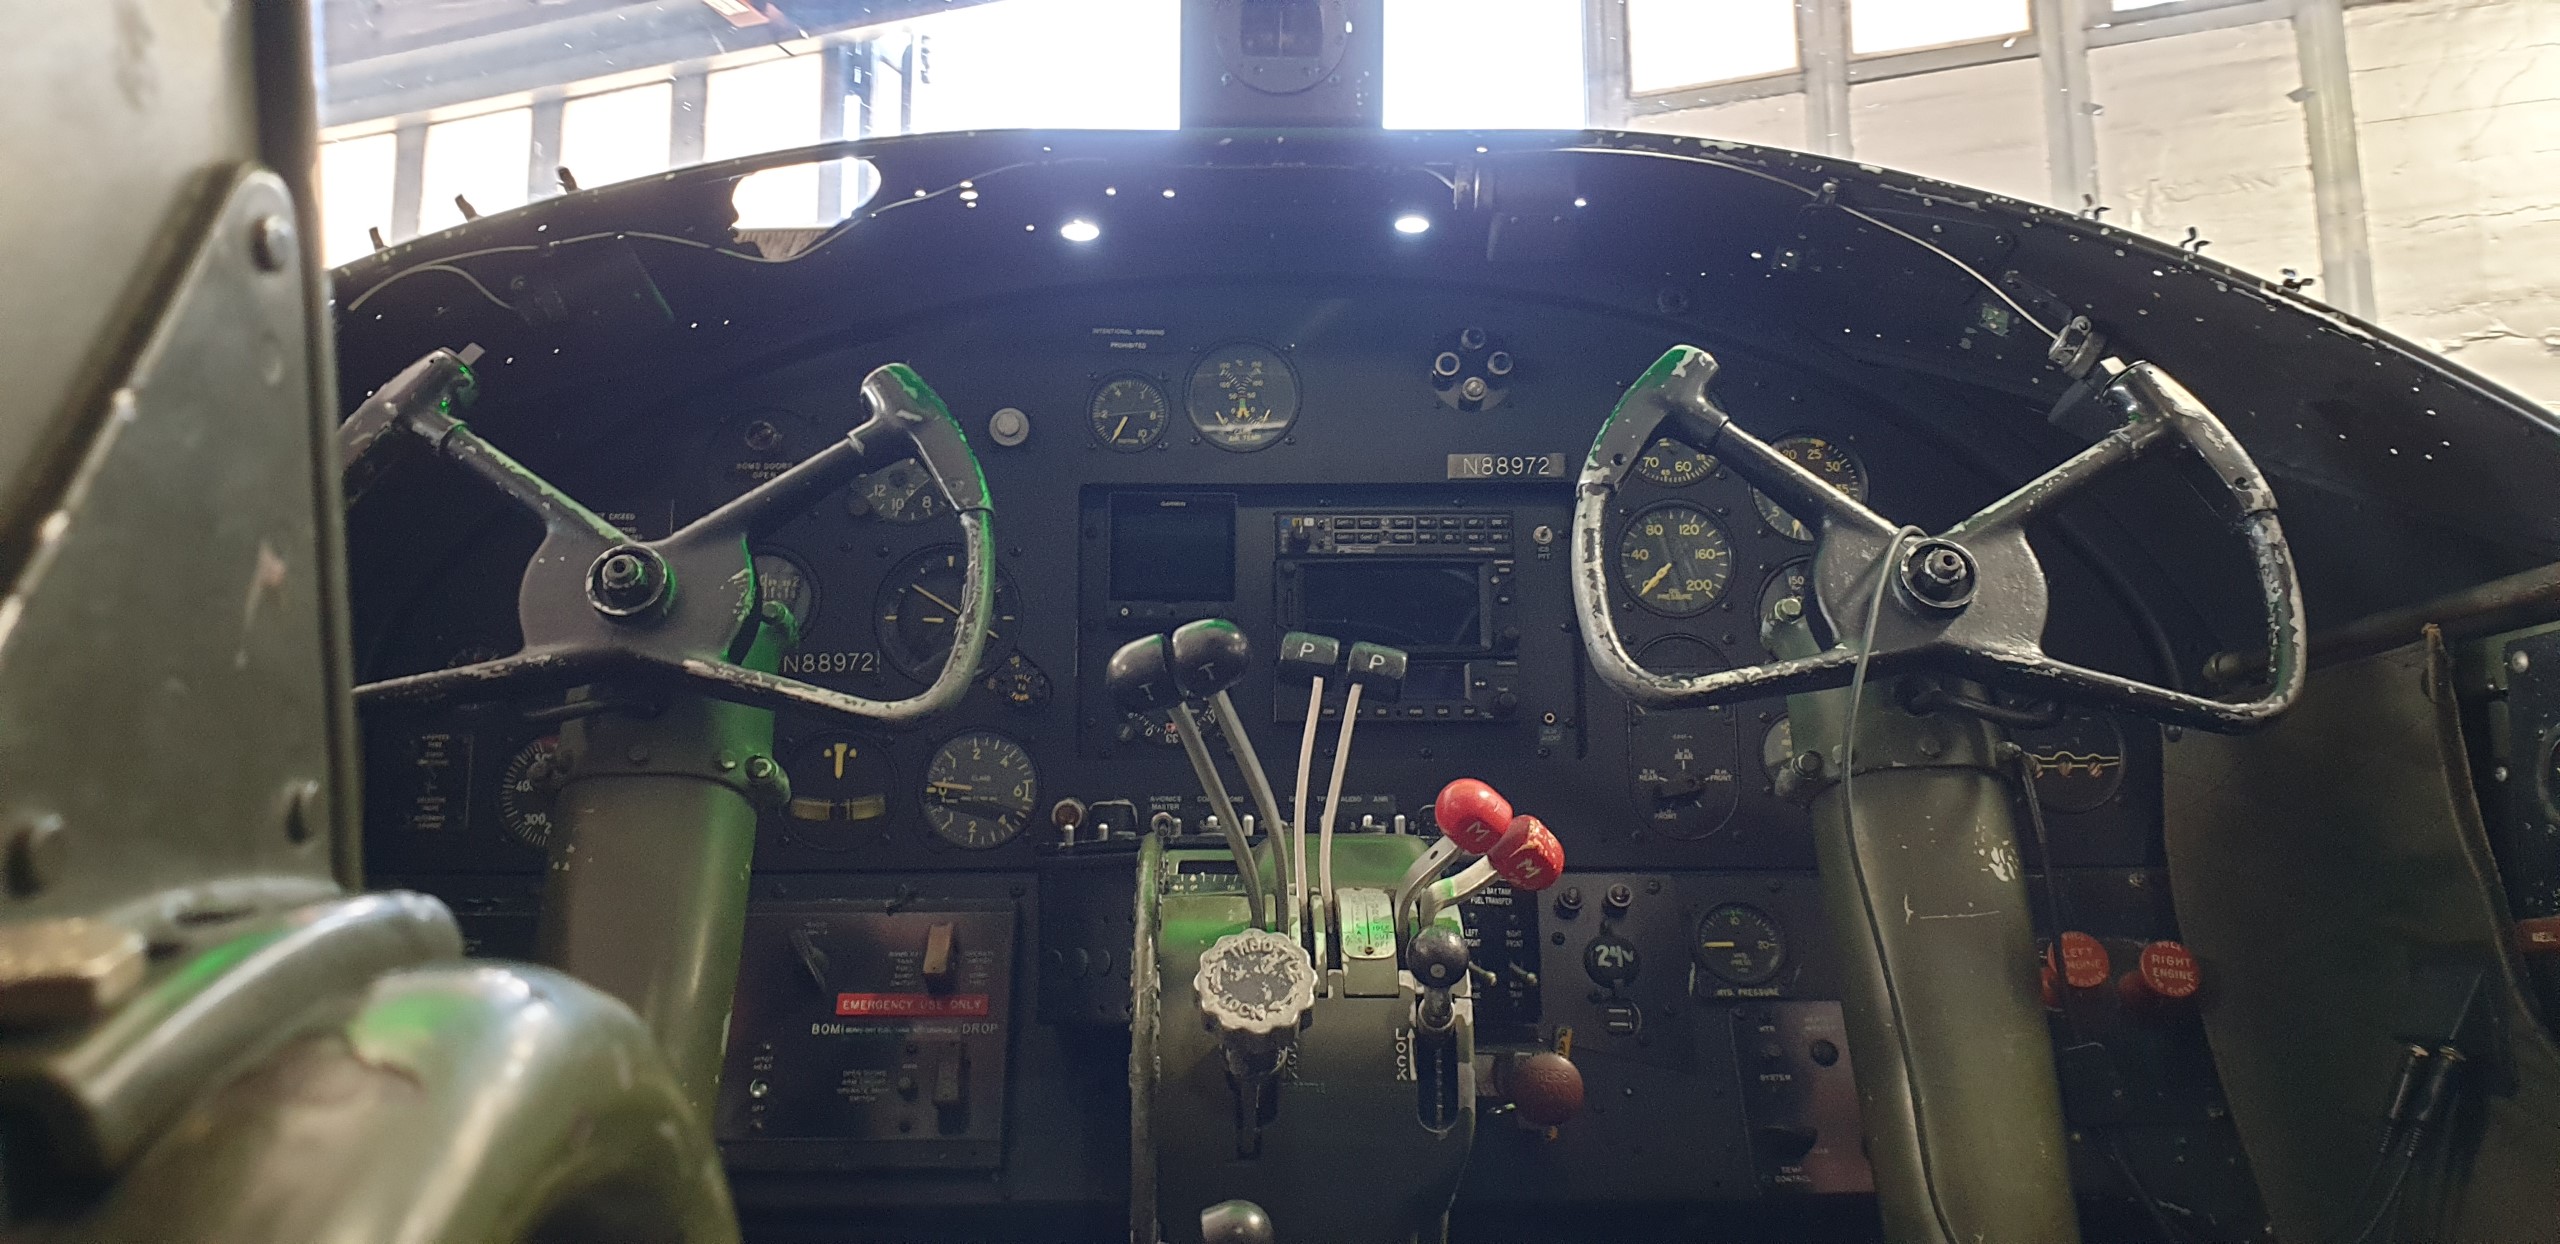 Inside one of the aircrafts